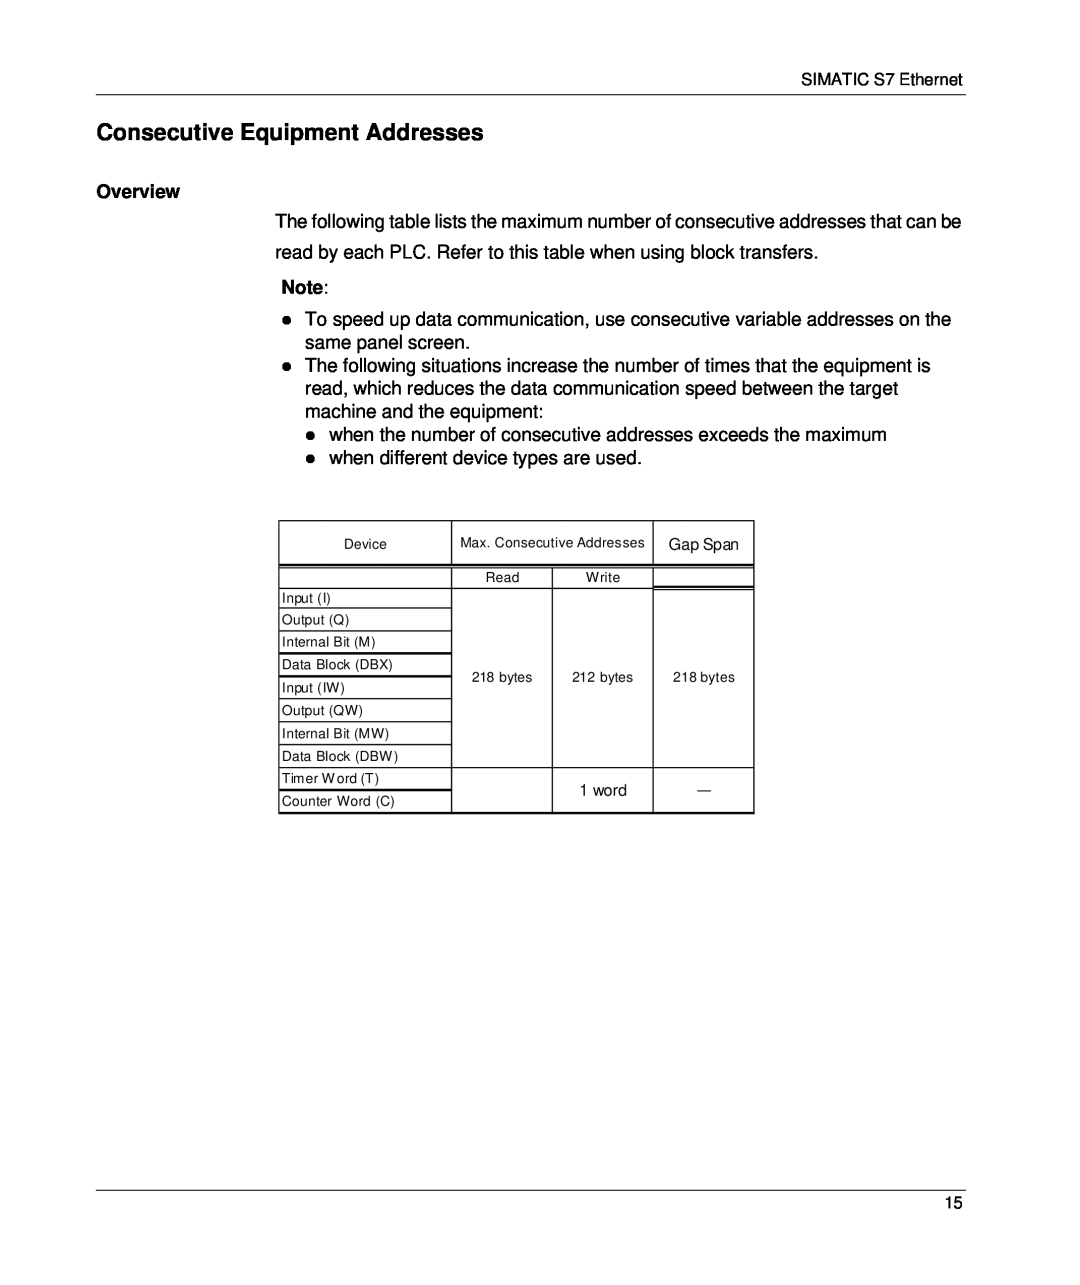 Schneider Electric S7 manual Consecutive Equipment Addresses, Overview, Gap Span 